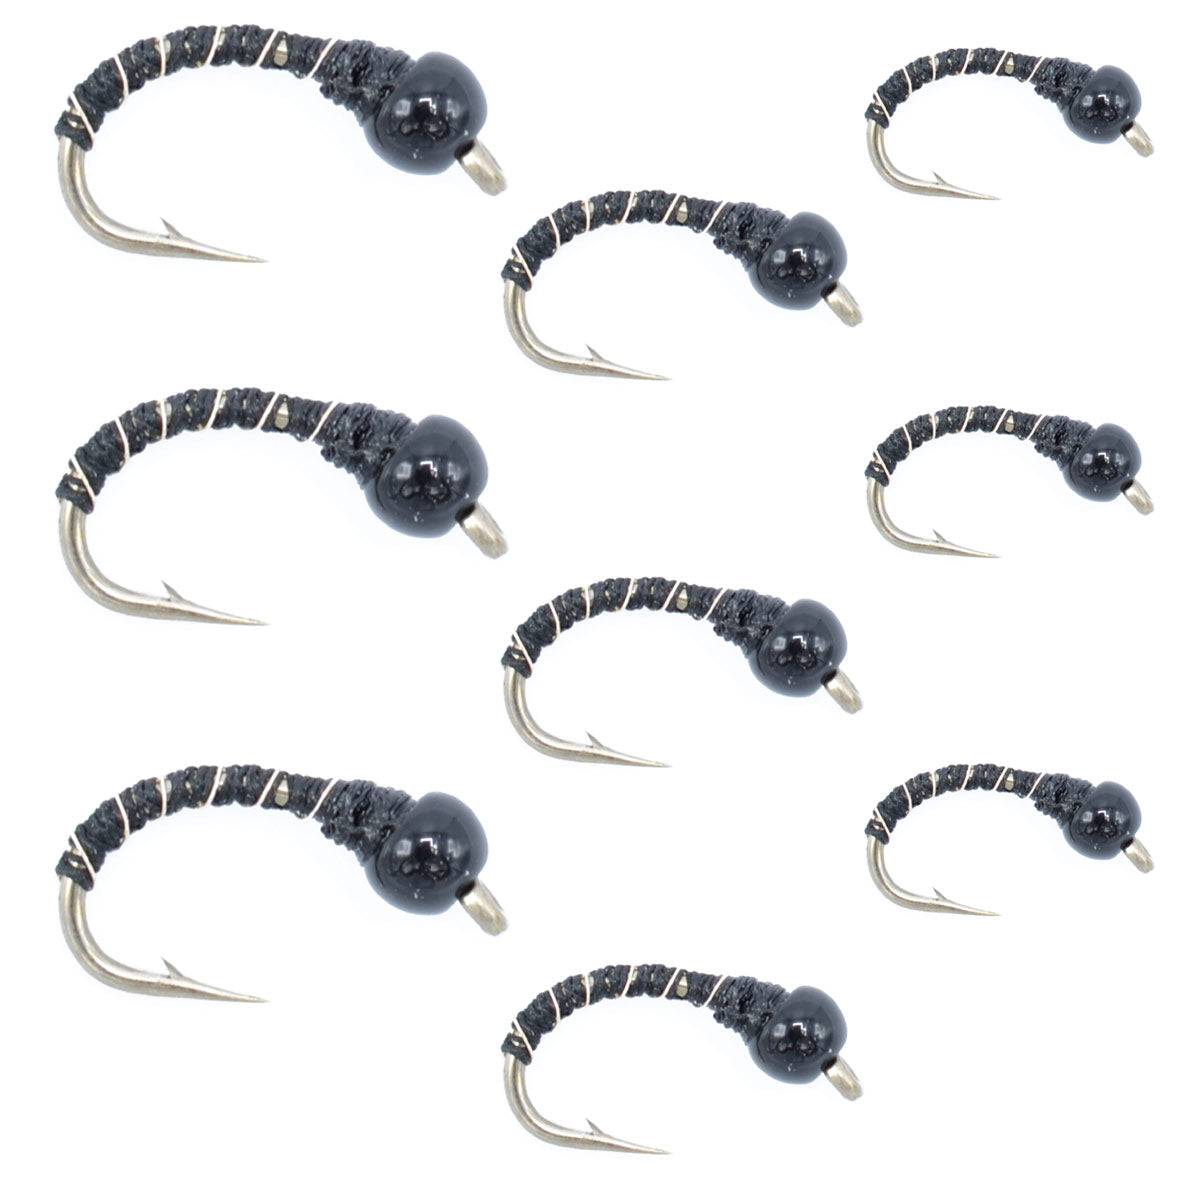 Black Zebra Midge Assortment 3 Each of 3 Sizes 14, 16, 18 - Tailwater Fly Fishing Flies Collection